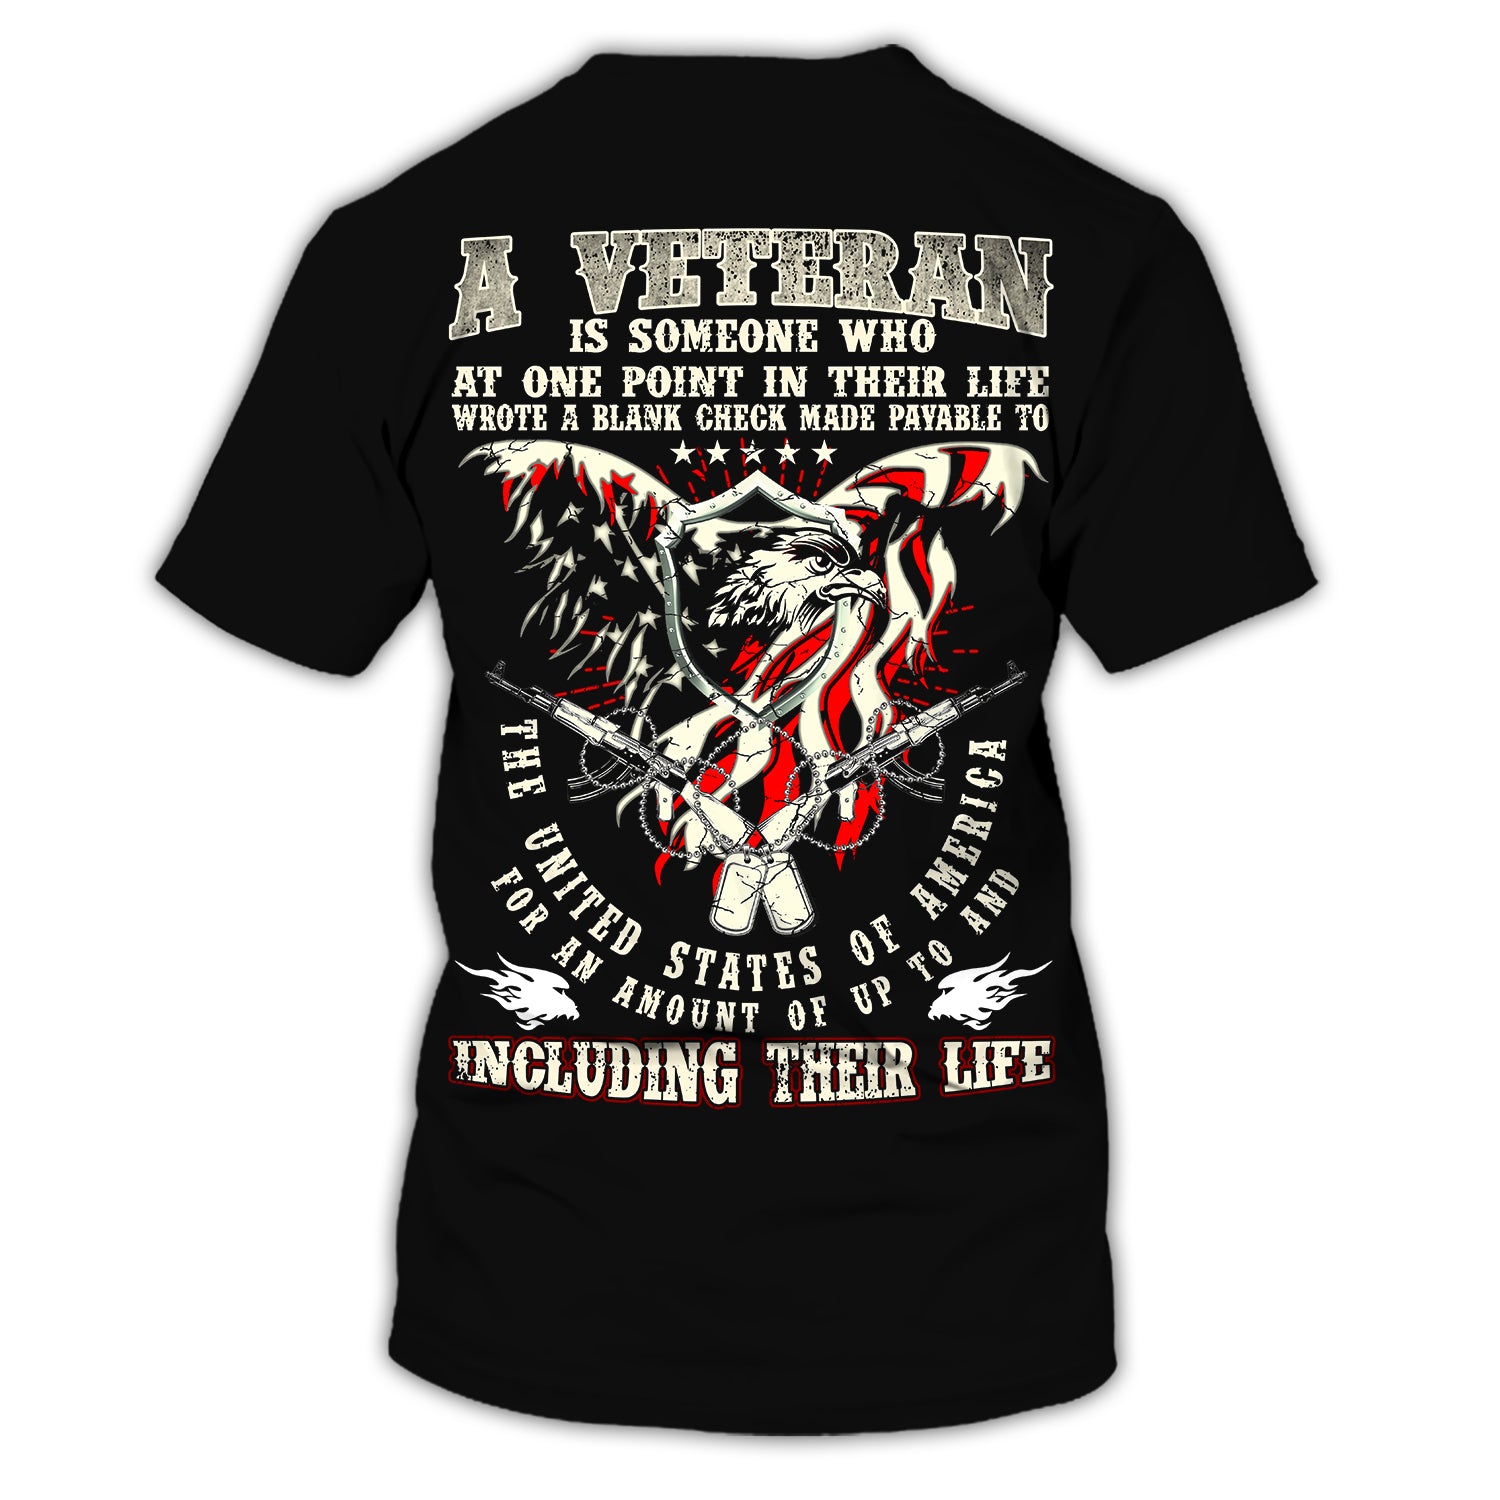 In Honor Of Our Veterans - Personalized Veteran T-Shirt, Gift For Veterans